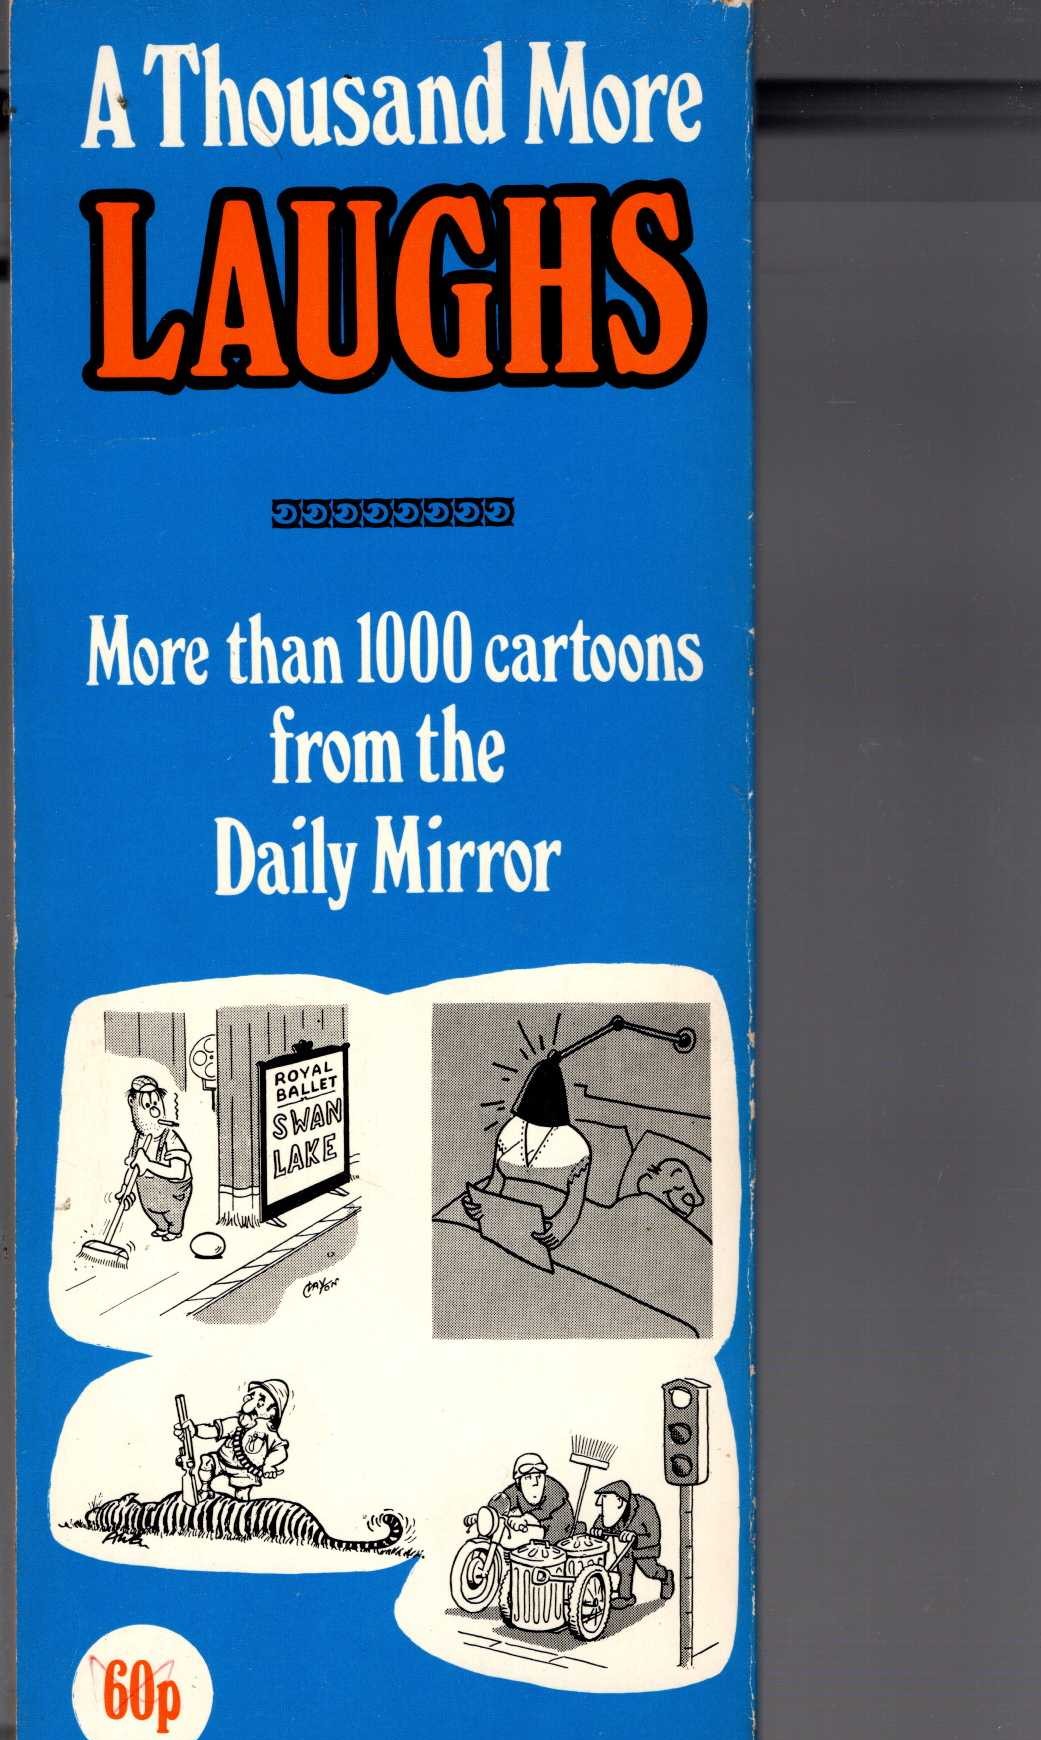 The Daily Mirror  A THOUSAND MORE LAUGHS magnified rear book cover image